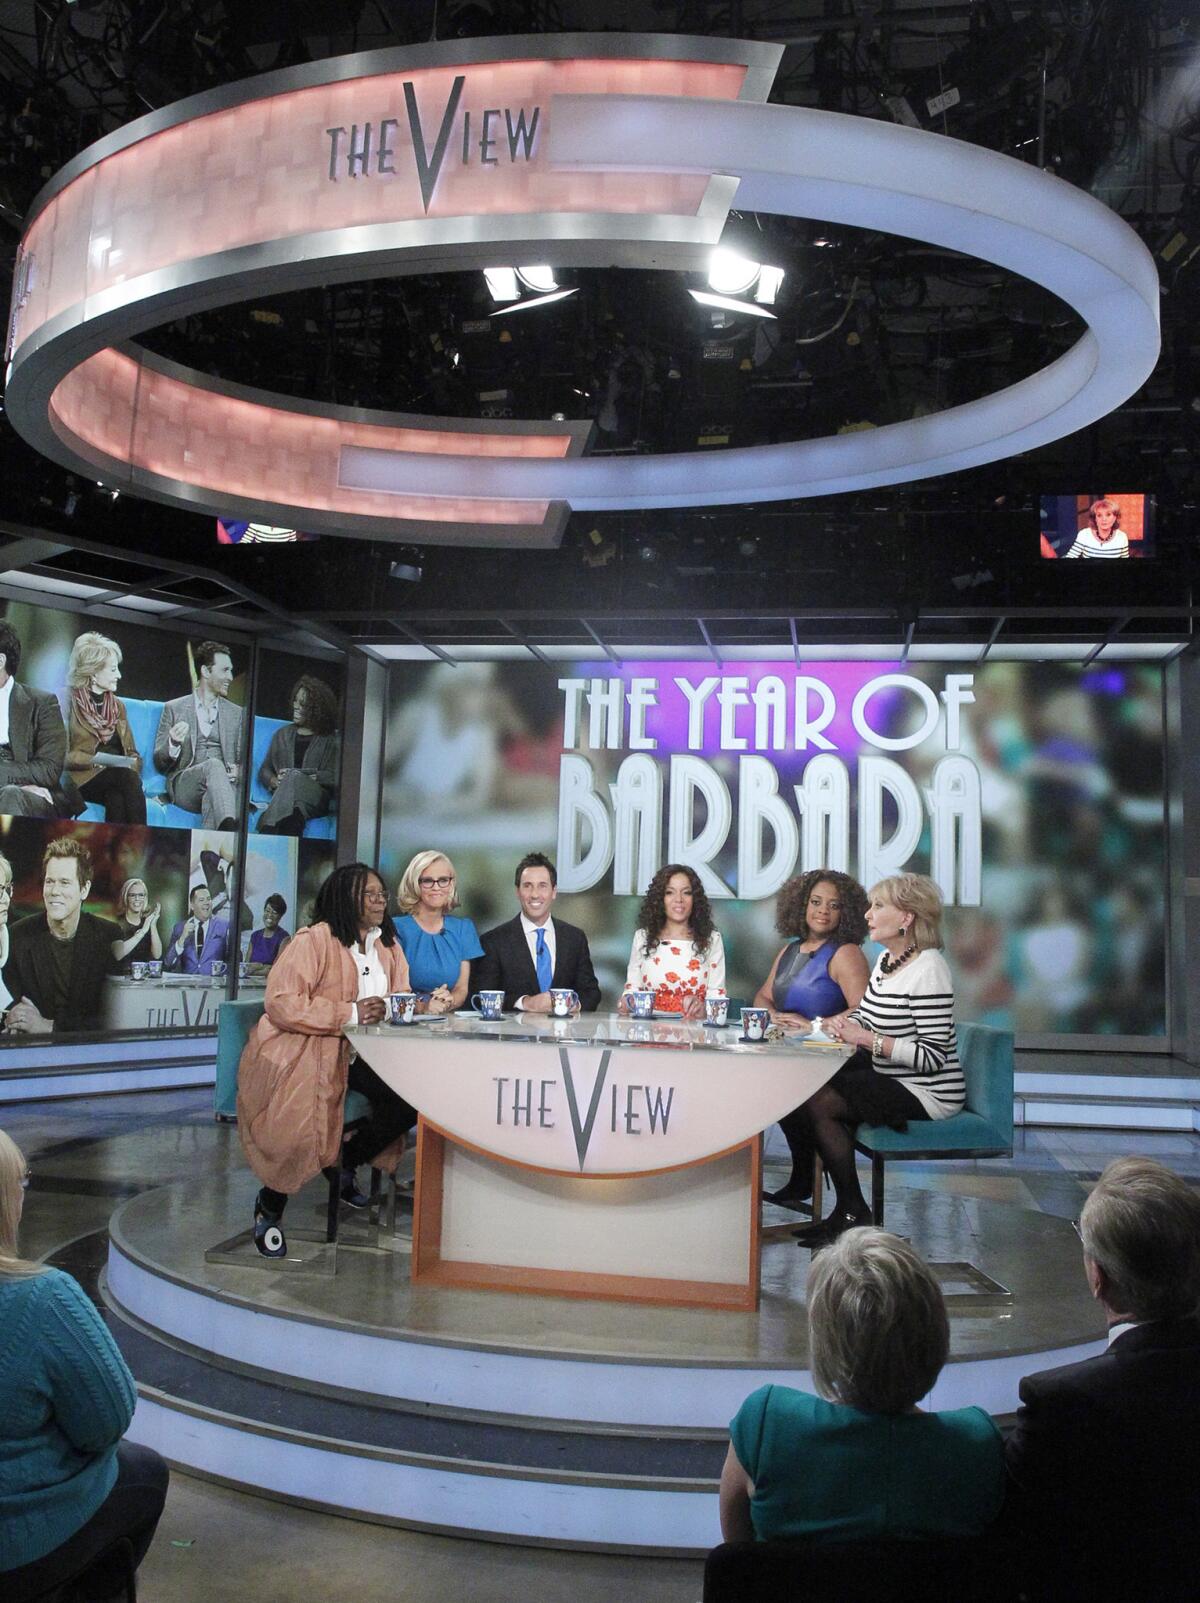 'The View' says goodbye to Barbara Walters.